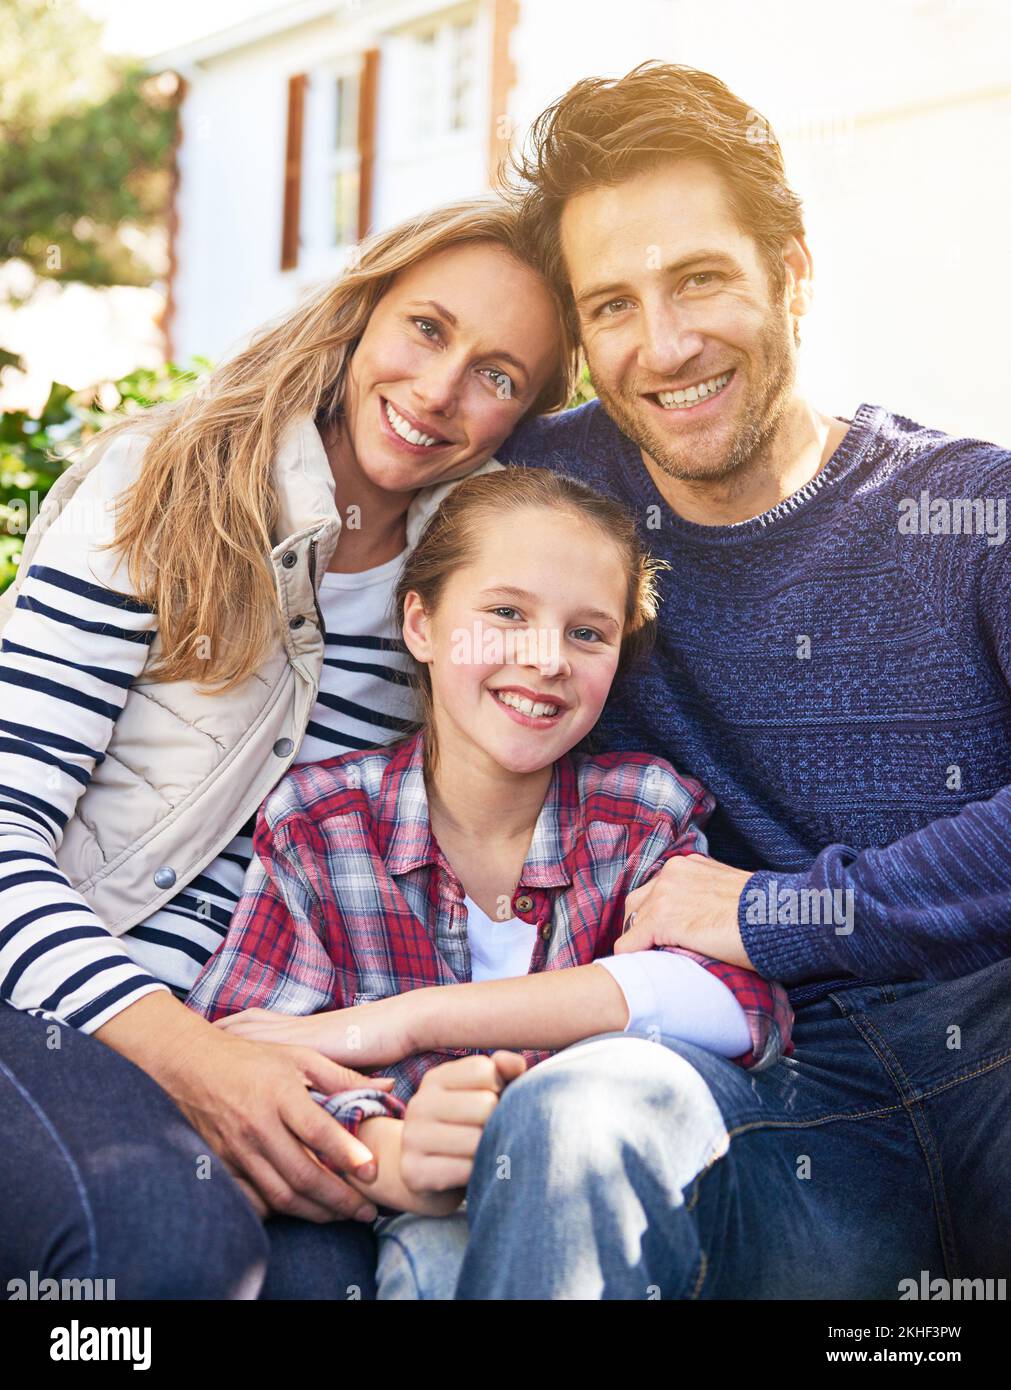 Together we make a family. Portrait of a family of three spending time together. Stock Photo